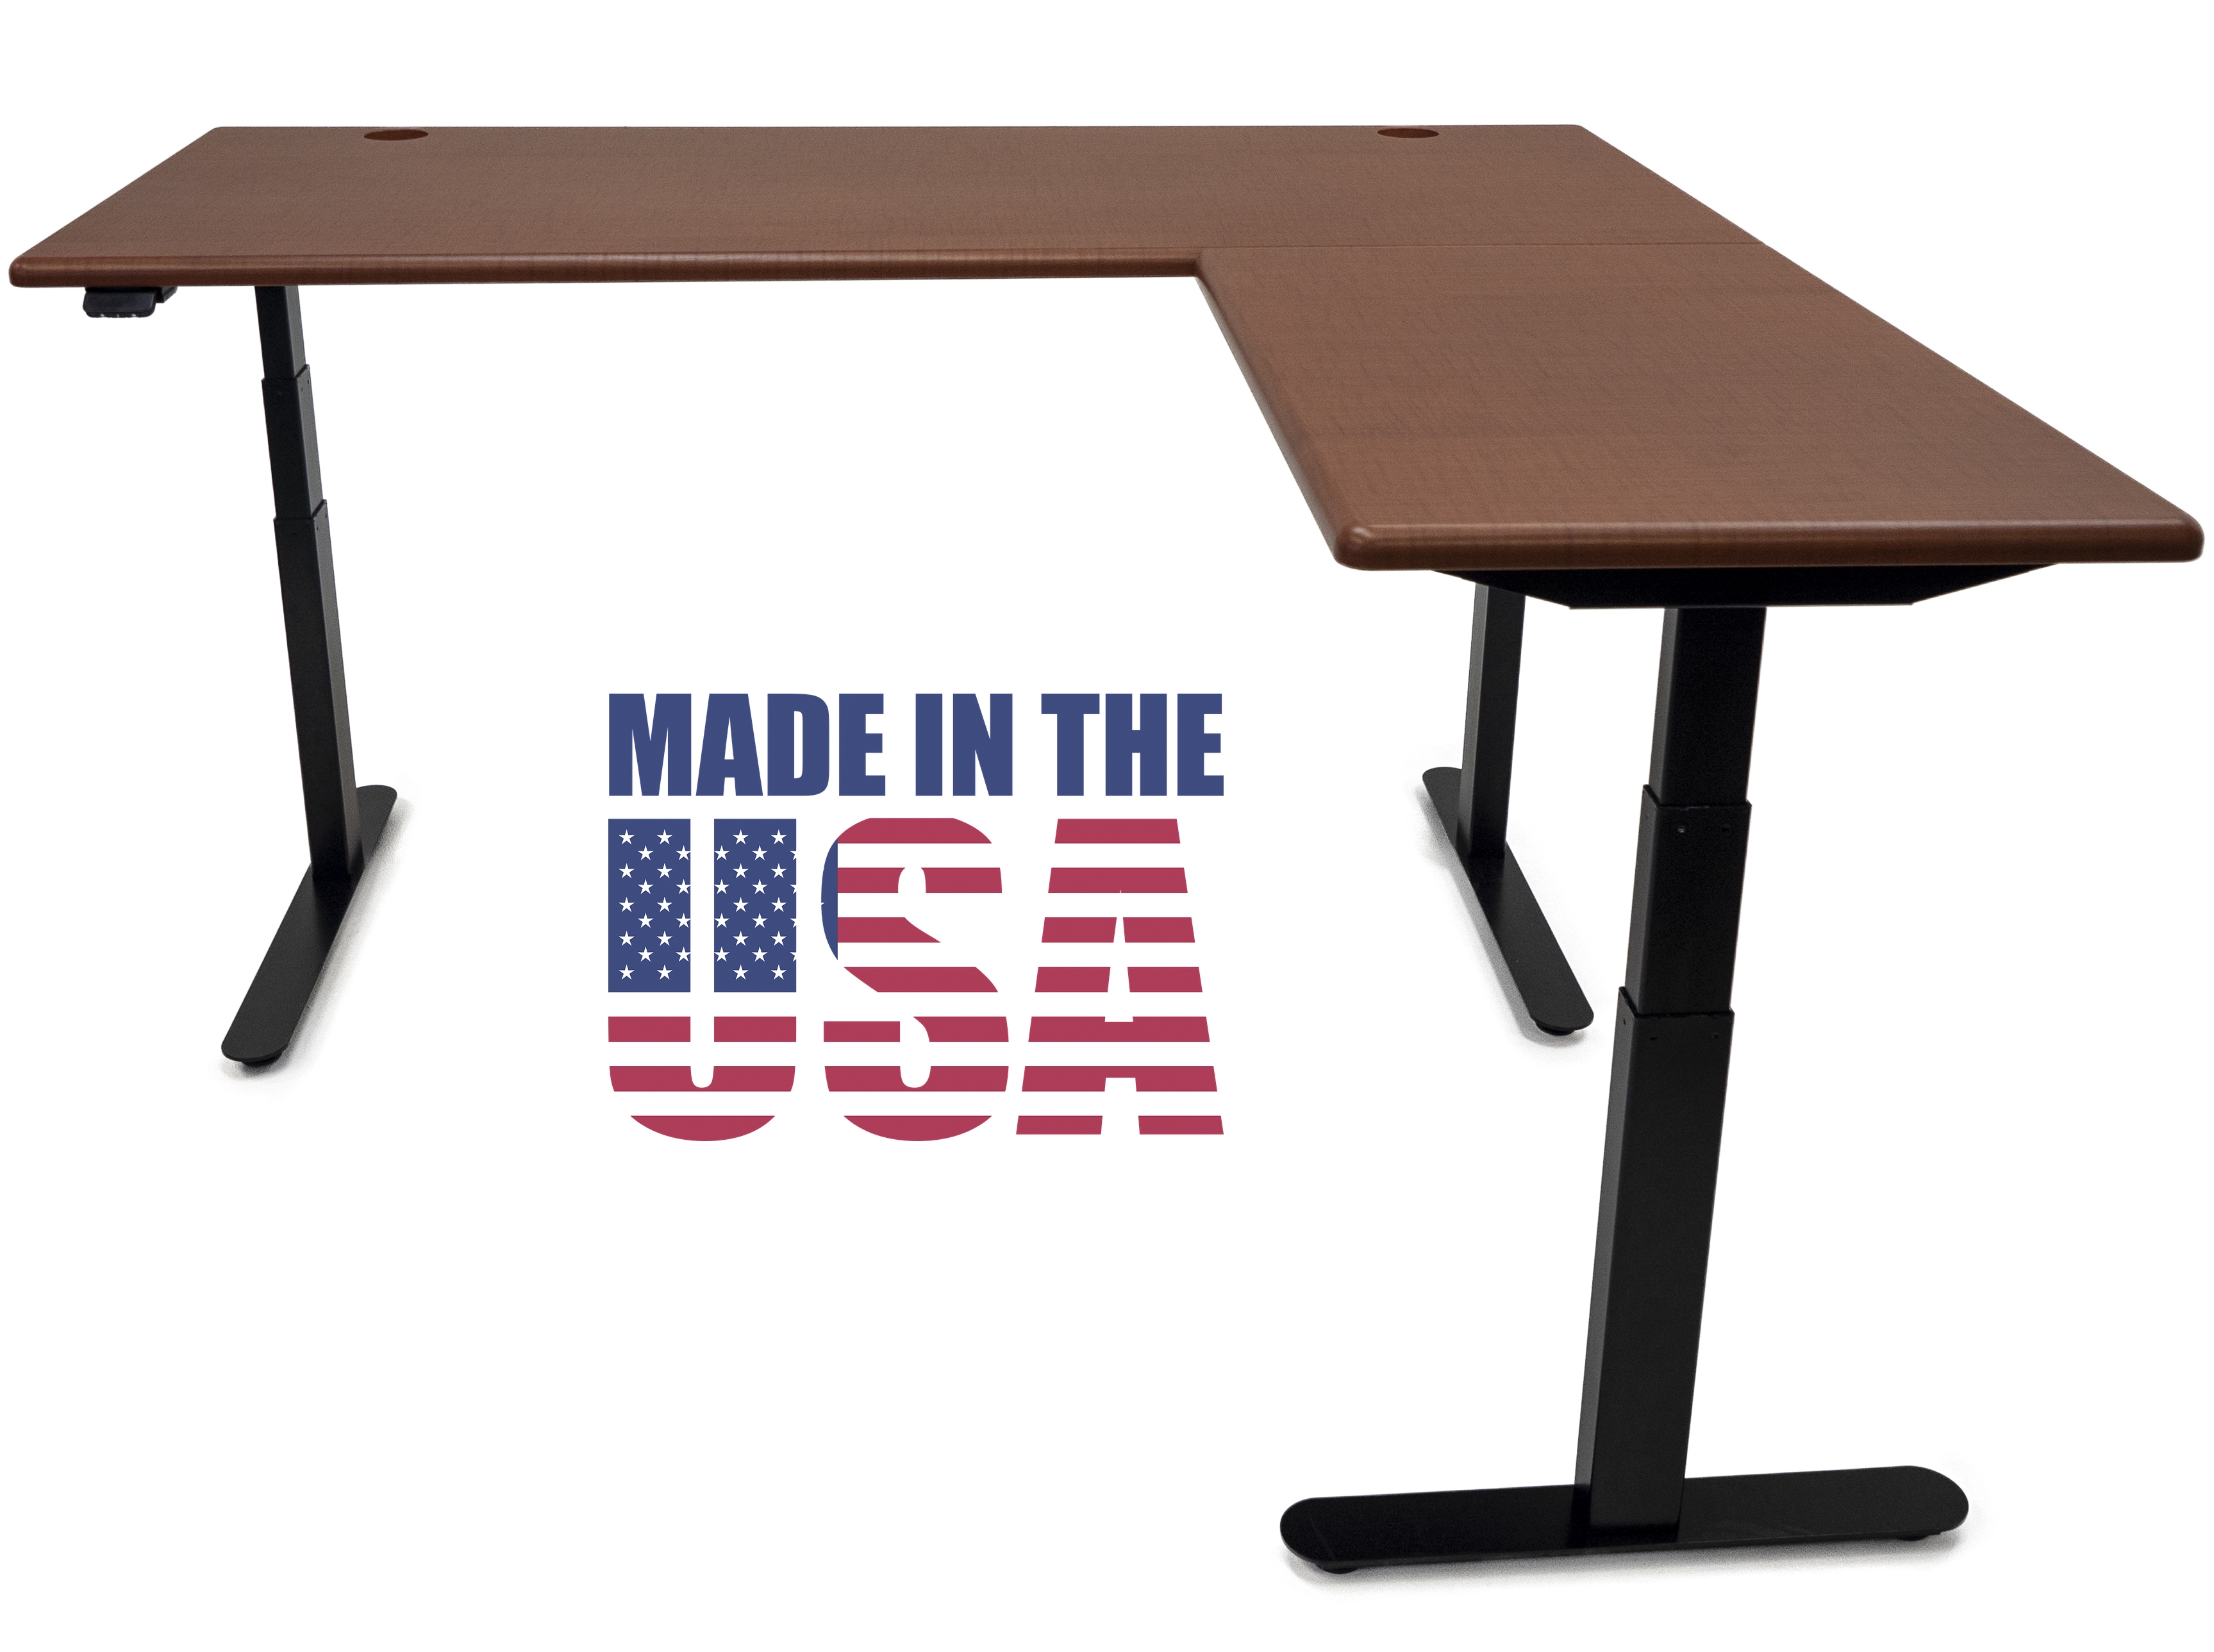 The Lander L-Desk is Made in the USA.